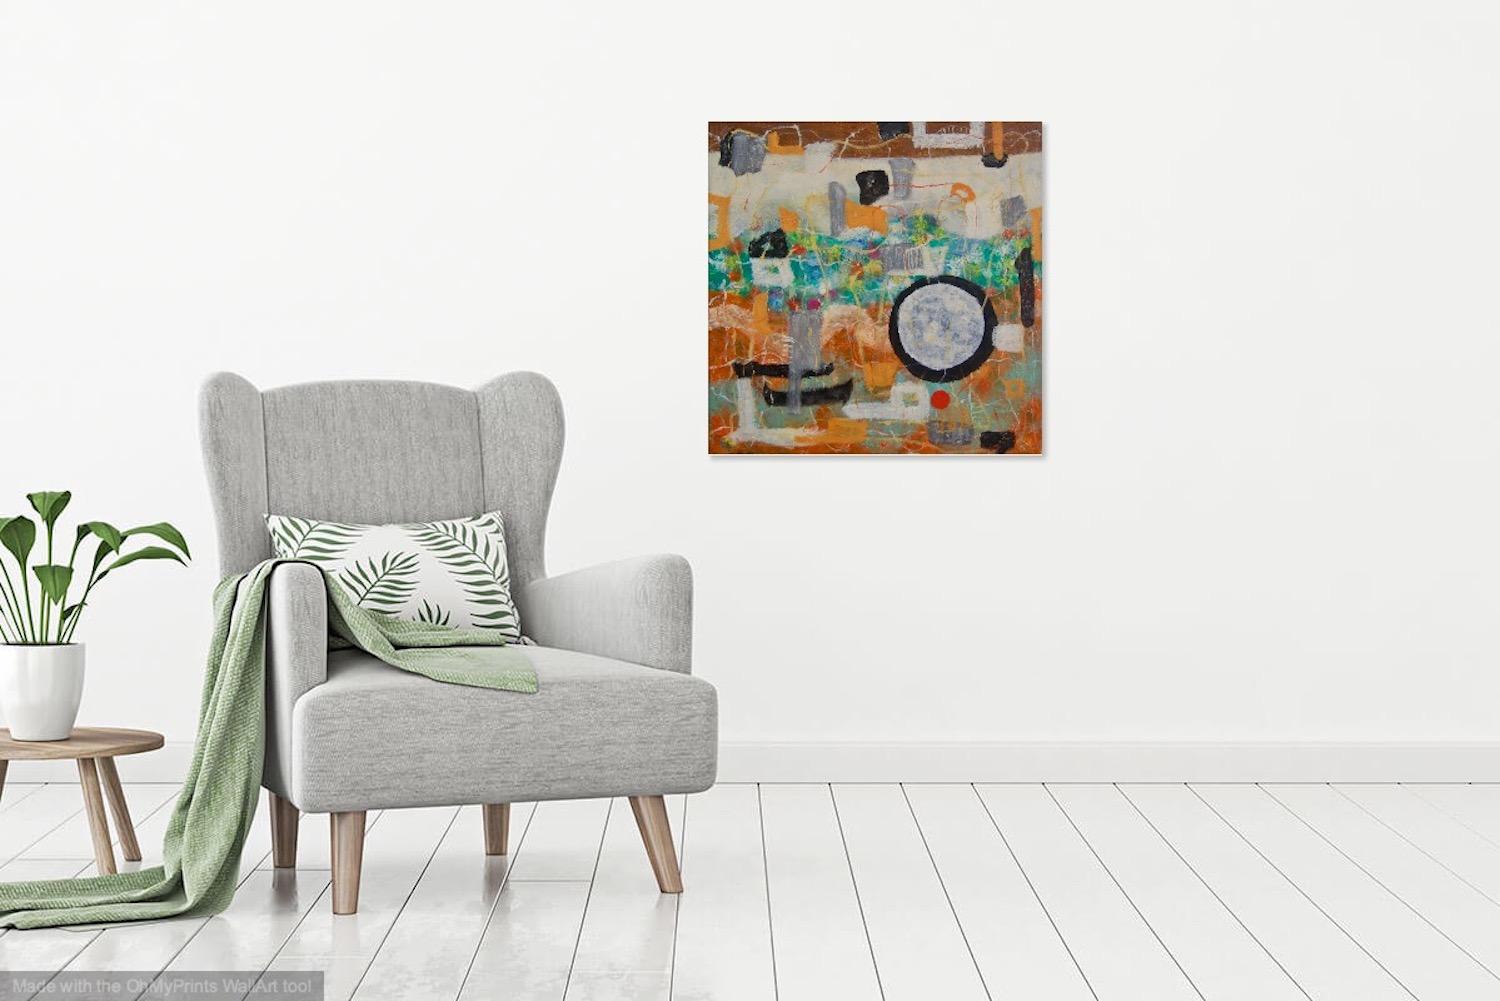 Deep Thoughts zen figures landscape abstract painting oil art with zen circles, warm earthy patterns orange decor with rich impasto textures